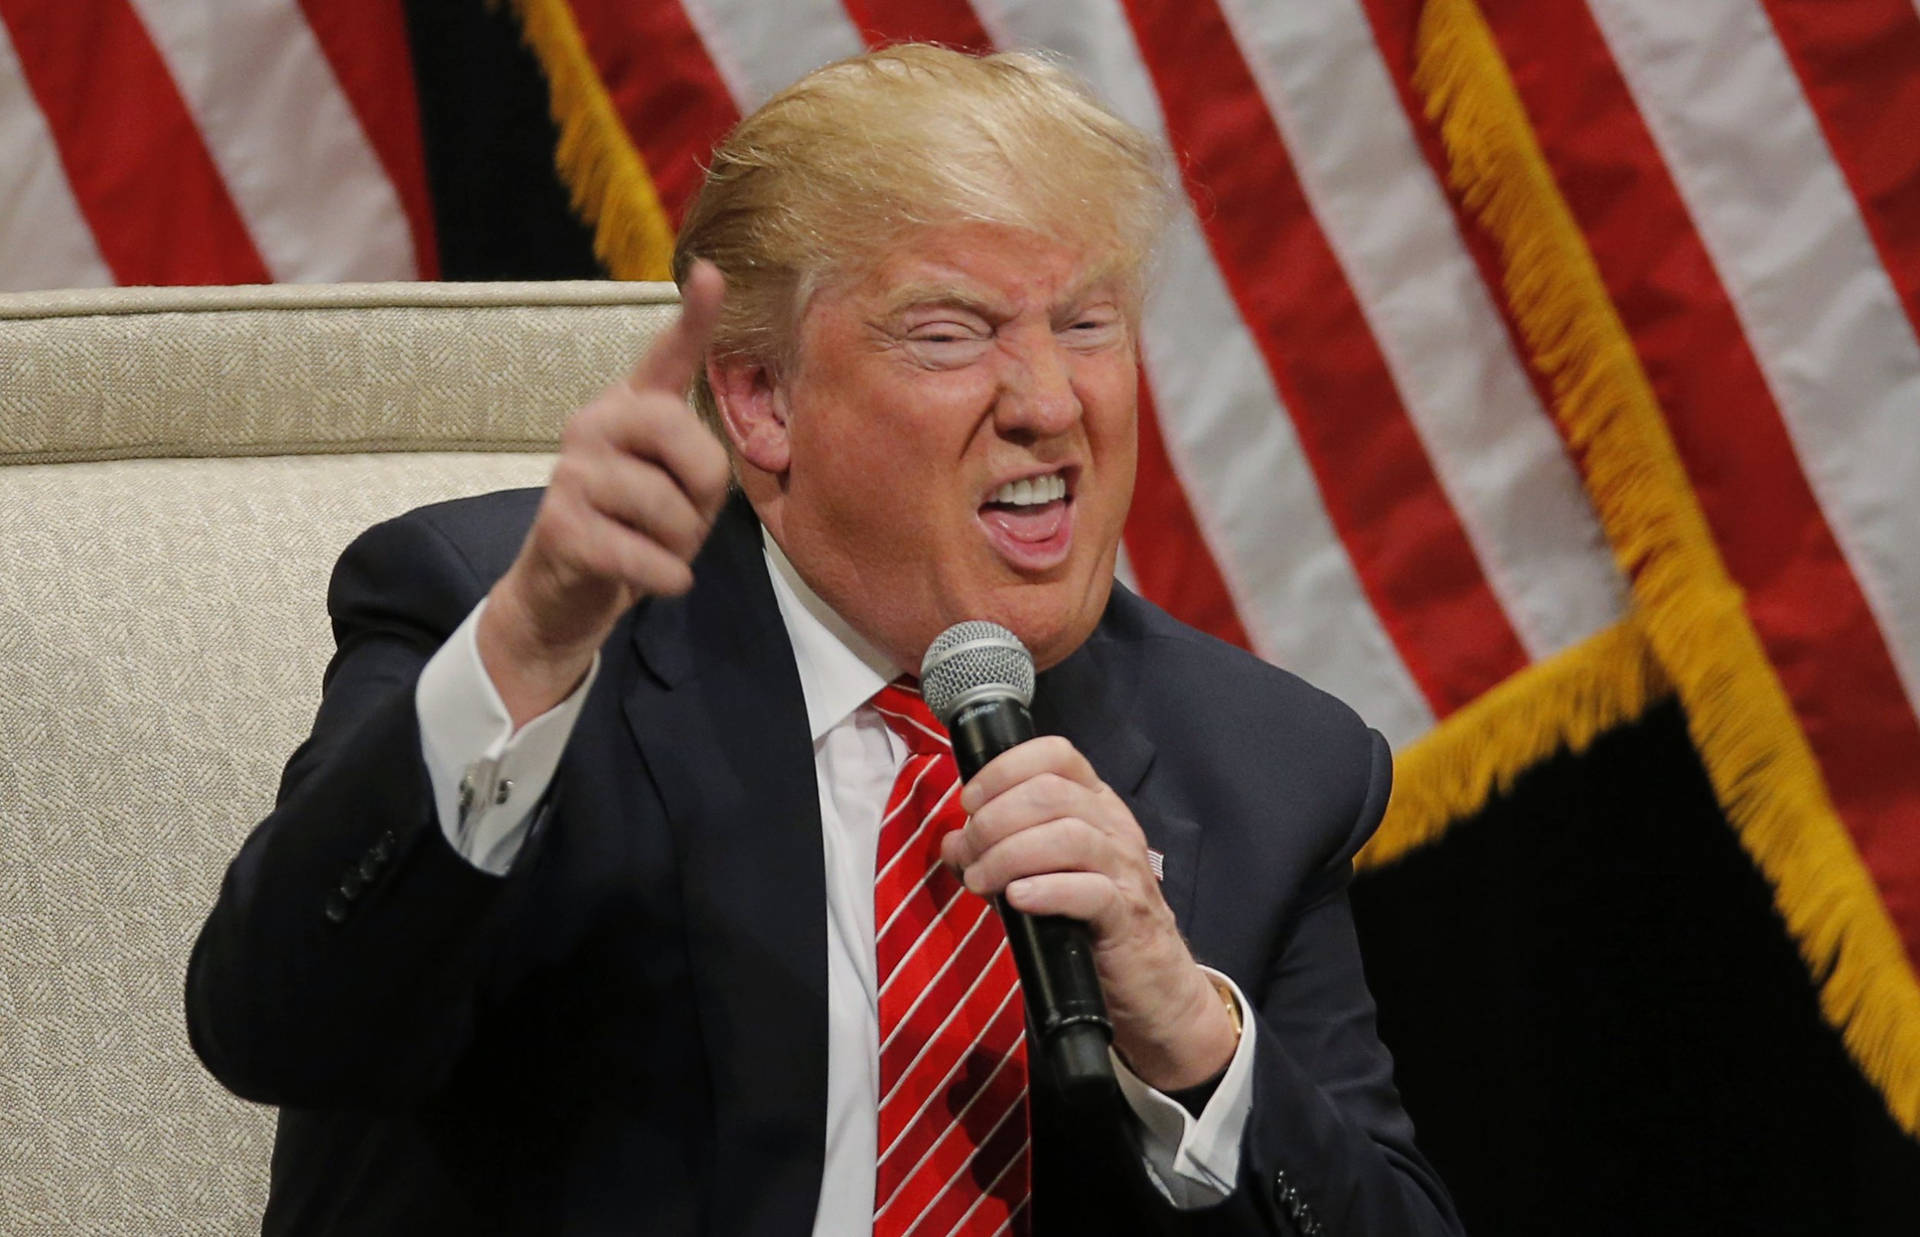 A Hilarious Expression: Donald Trump In A Lighter Vein